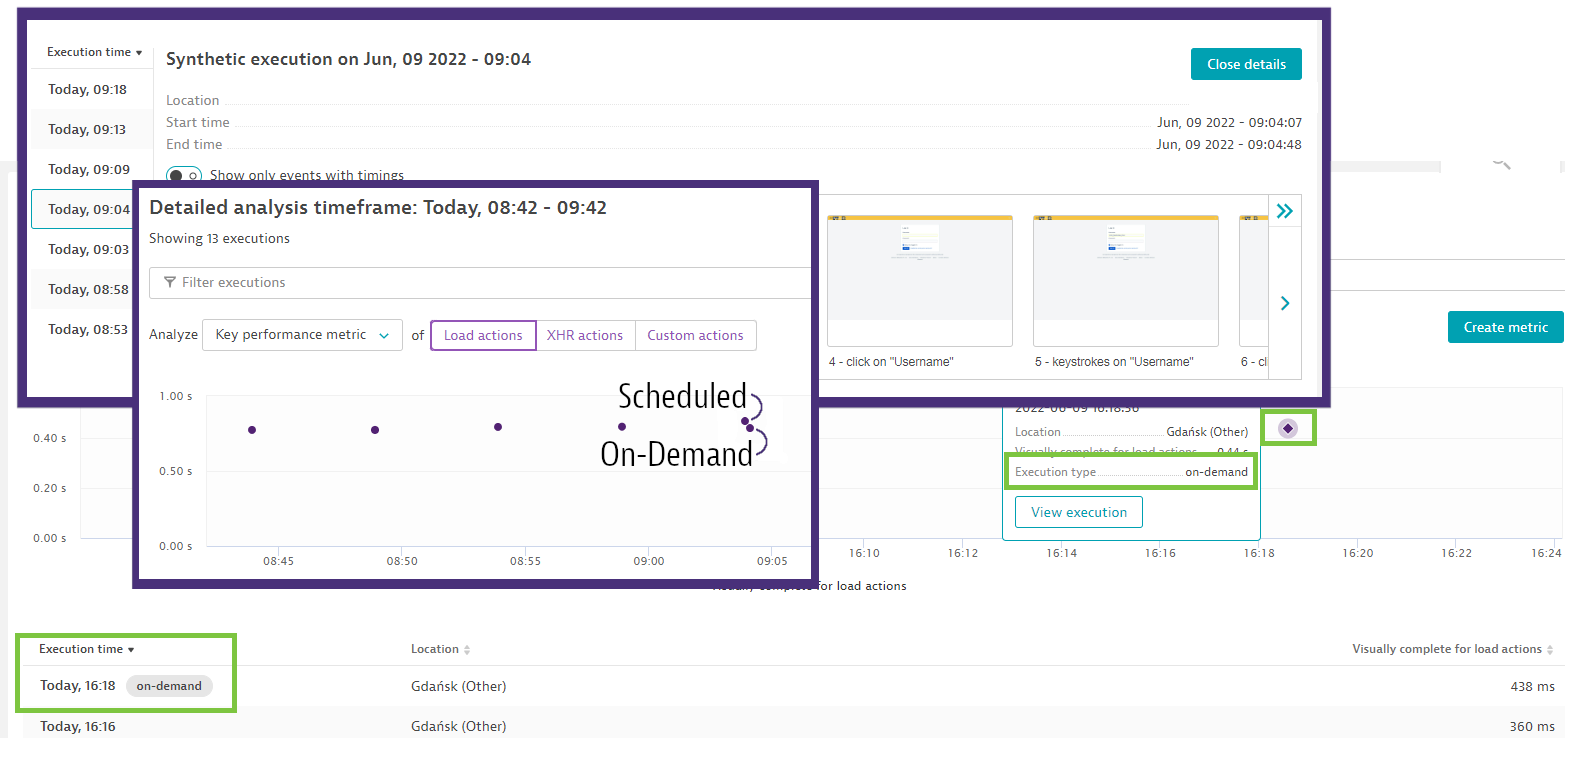 Dynatrace adds annotations to all on-demand monitor executions and thereby captures all related execution overview details